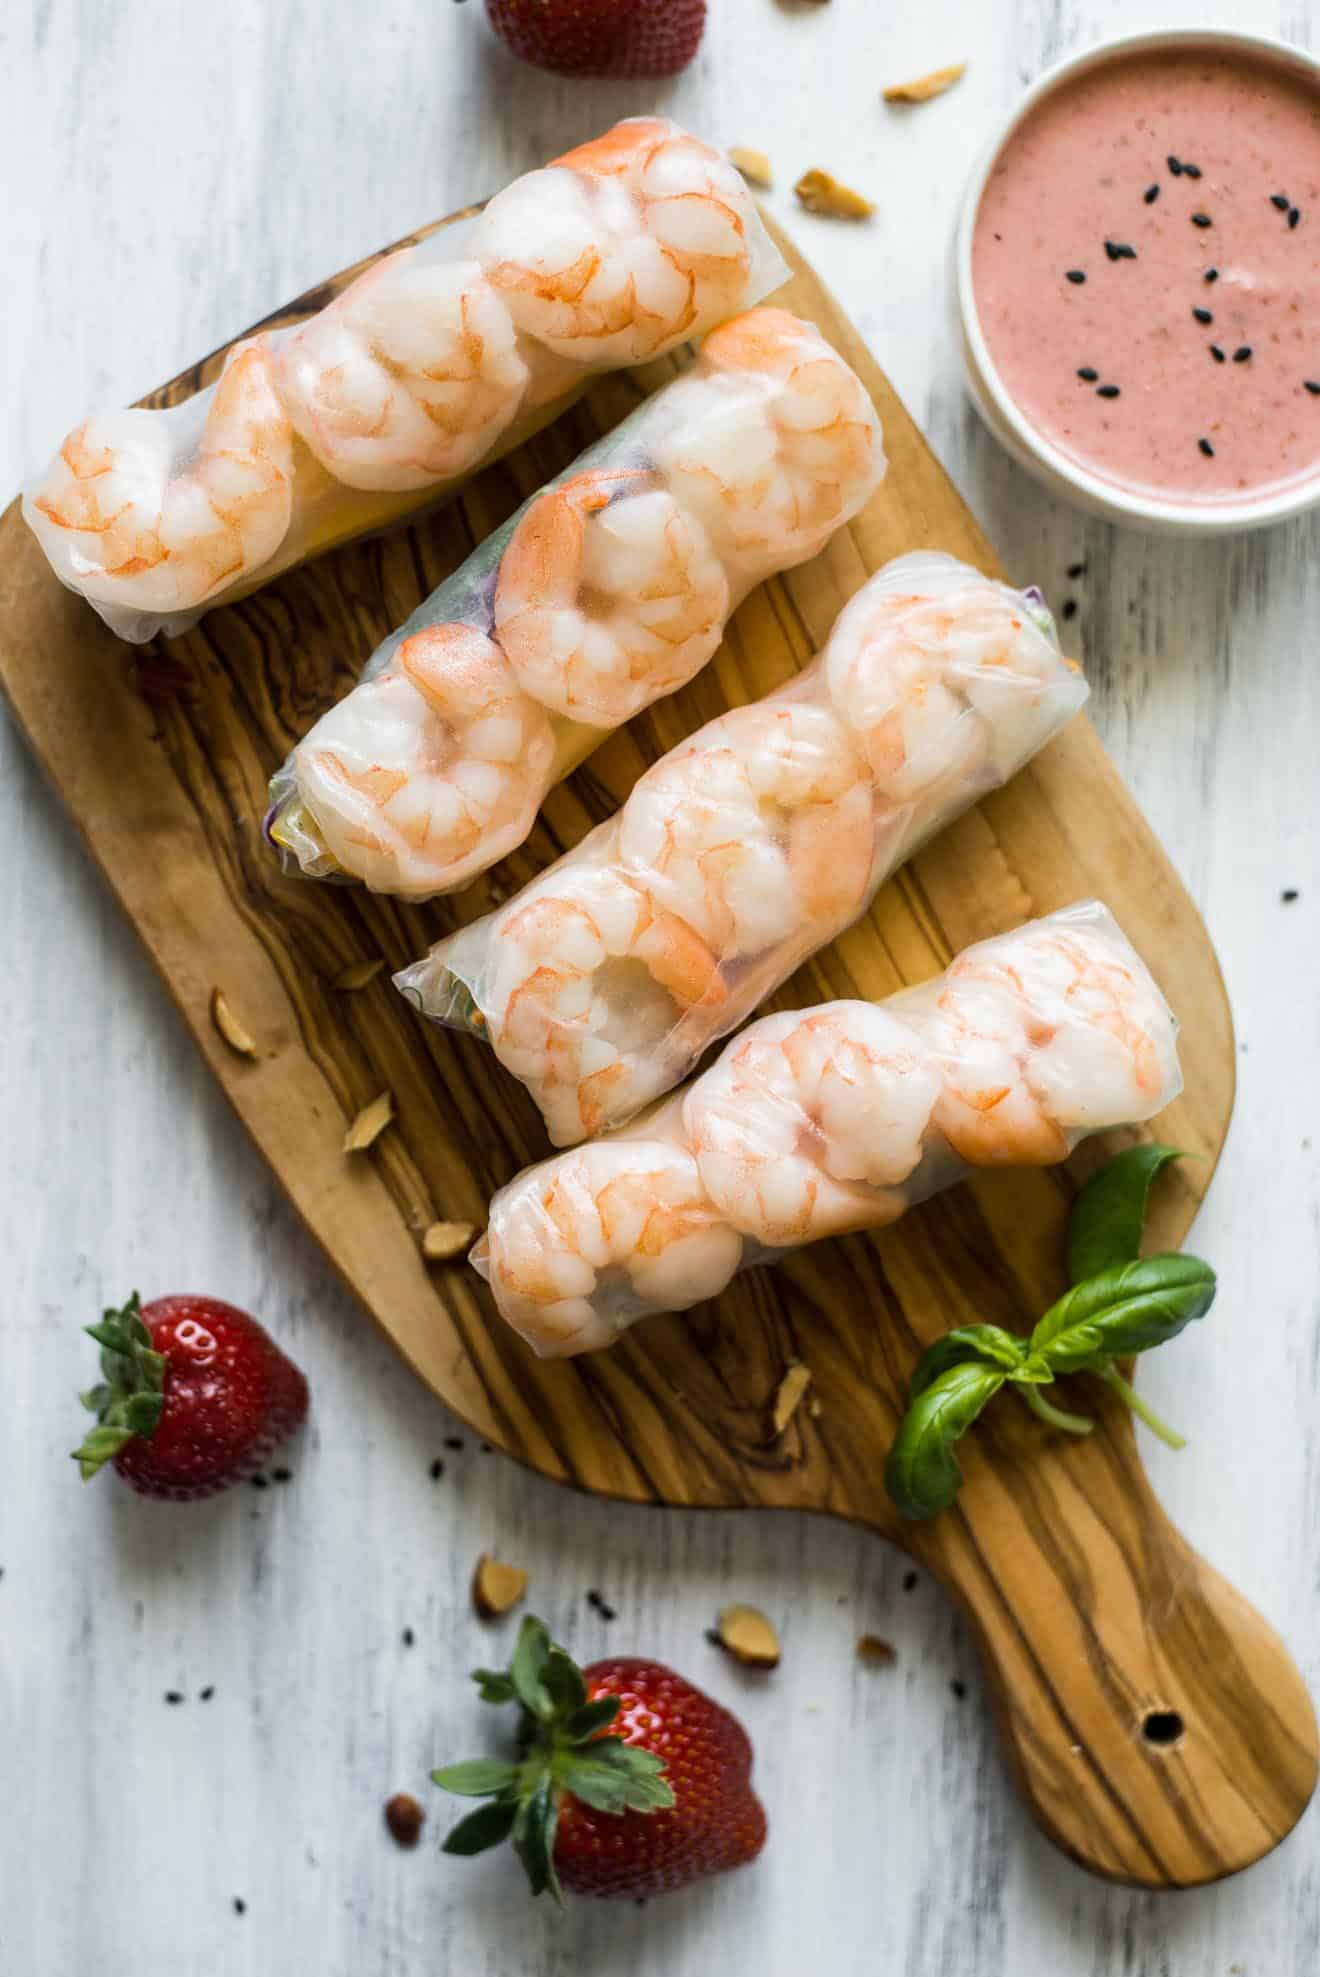 Shrimp Spring Rolls with Strawberry Almond Sauce - easy, healthy summer appetizer ready in 30 minutes! #healthy #glutenfree